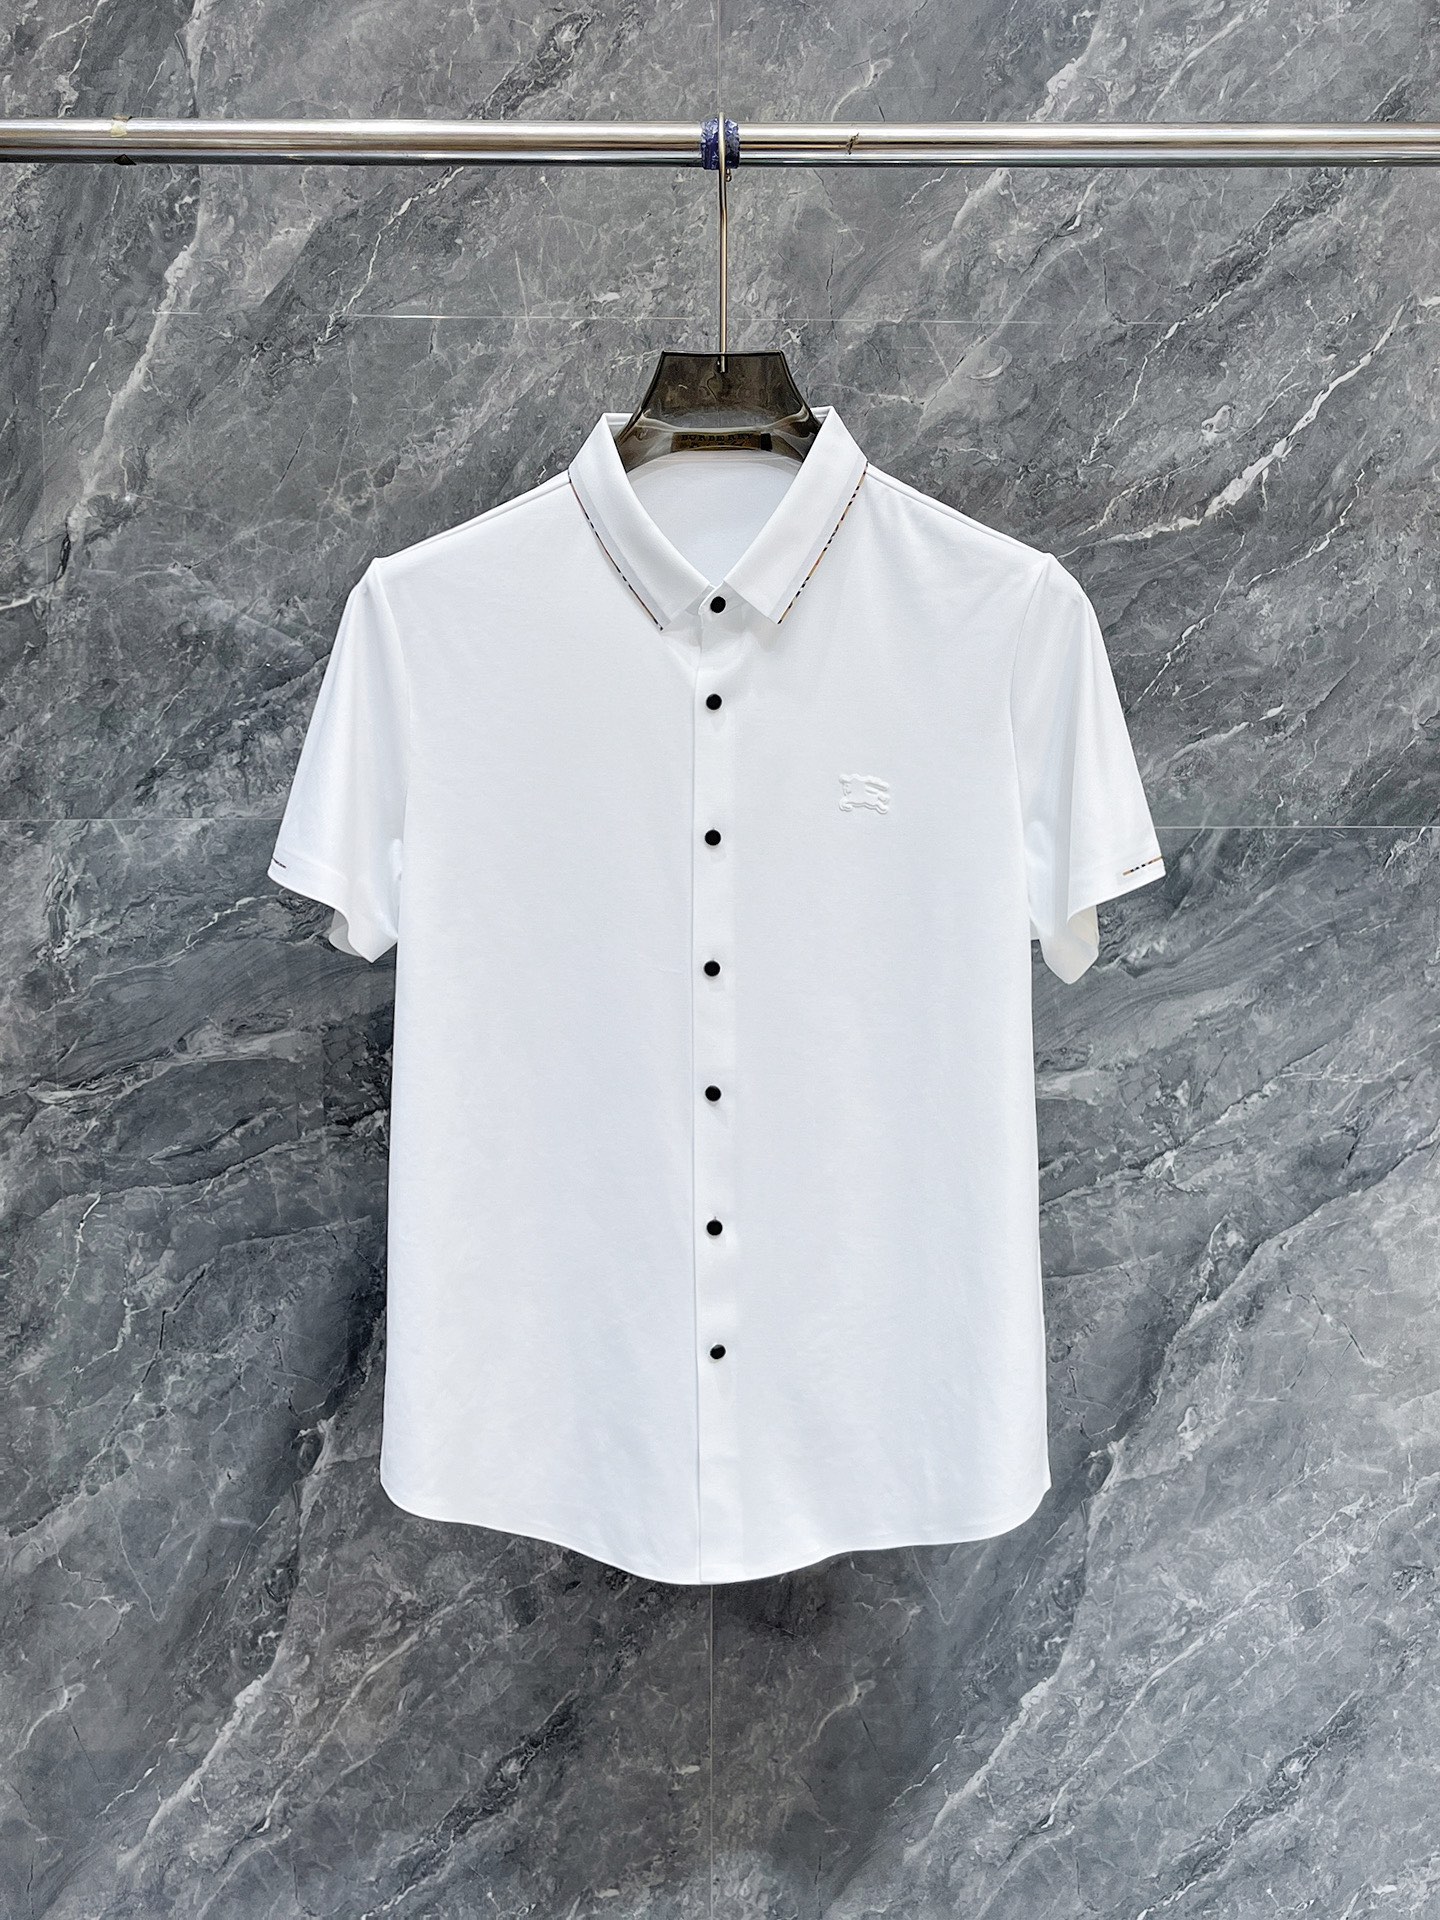 Burberry Clothing T-Shirt White Summer Collection Short Sleeve